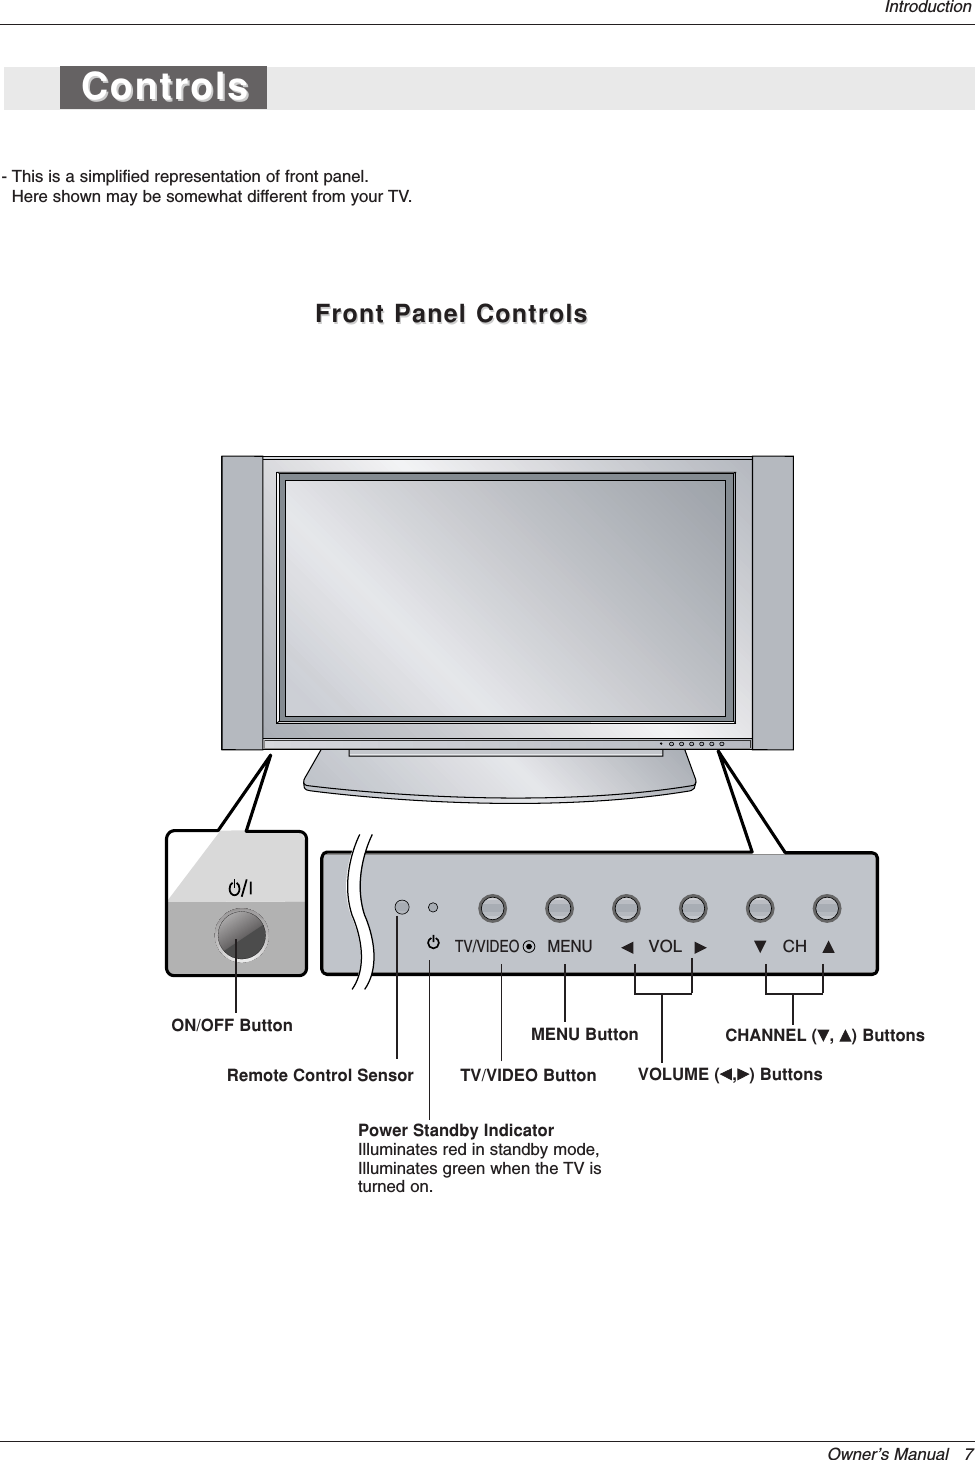 Owner’s Manual   7Introduction- This is a simplified representation of front panel. Here shown may be somewhat different from your TV.ControlsControlsFront Panel ControlsFront Panel ControlsTV/VIDEOMENUVOL CHON/OFF ButtonRemote Control Sensor VOLUME (F,G) ButtonsPower Standby IndicatorIlluminates red in standby mode,Illuminates green when the TV isturned on.CHANNEL (E, D) ButtonsMENU ButtonTV/VIDEO Button